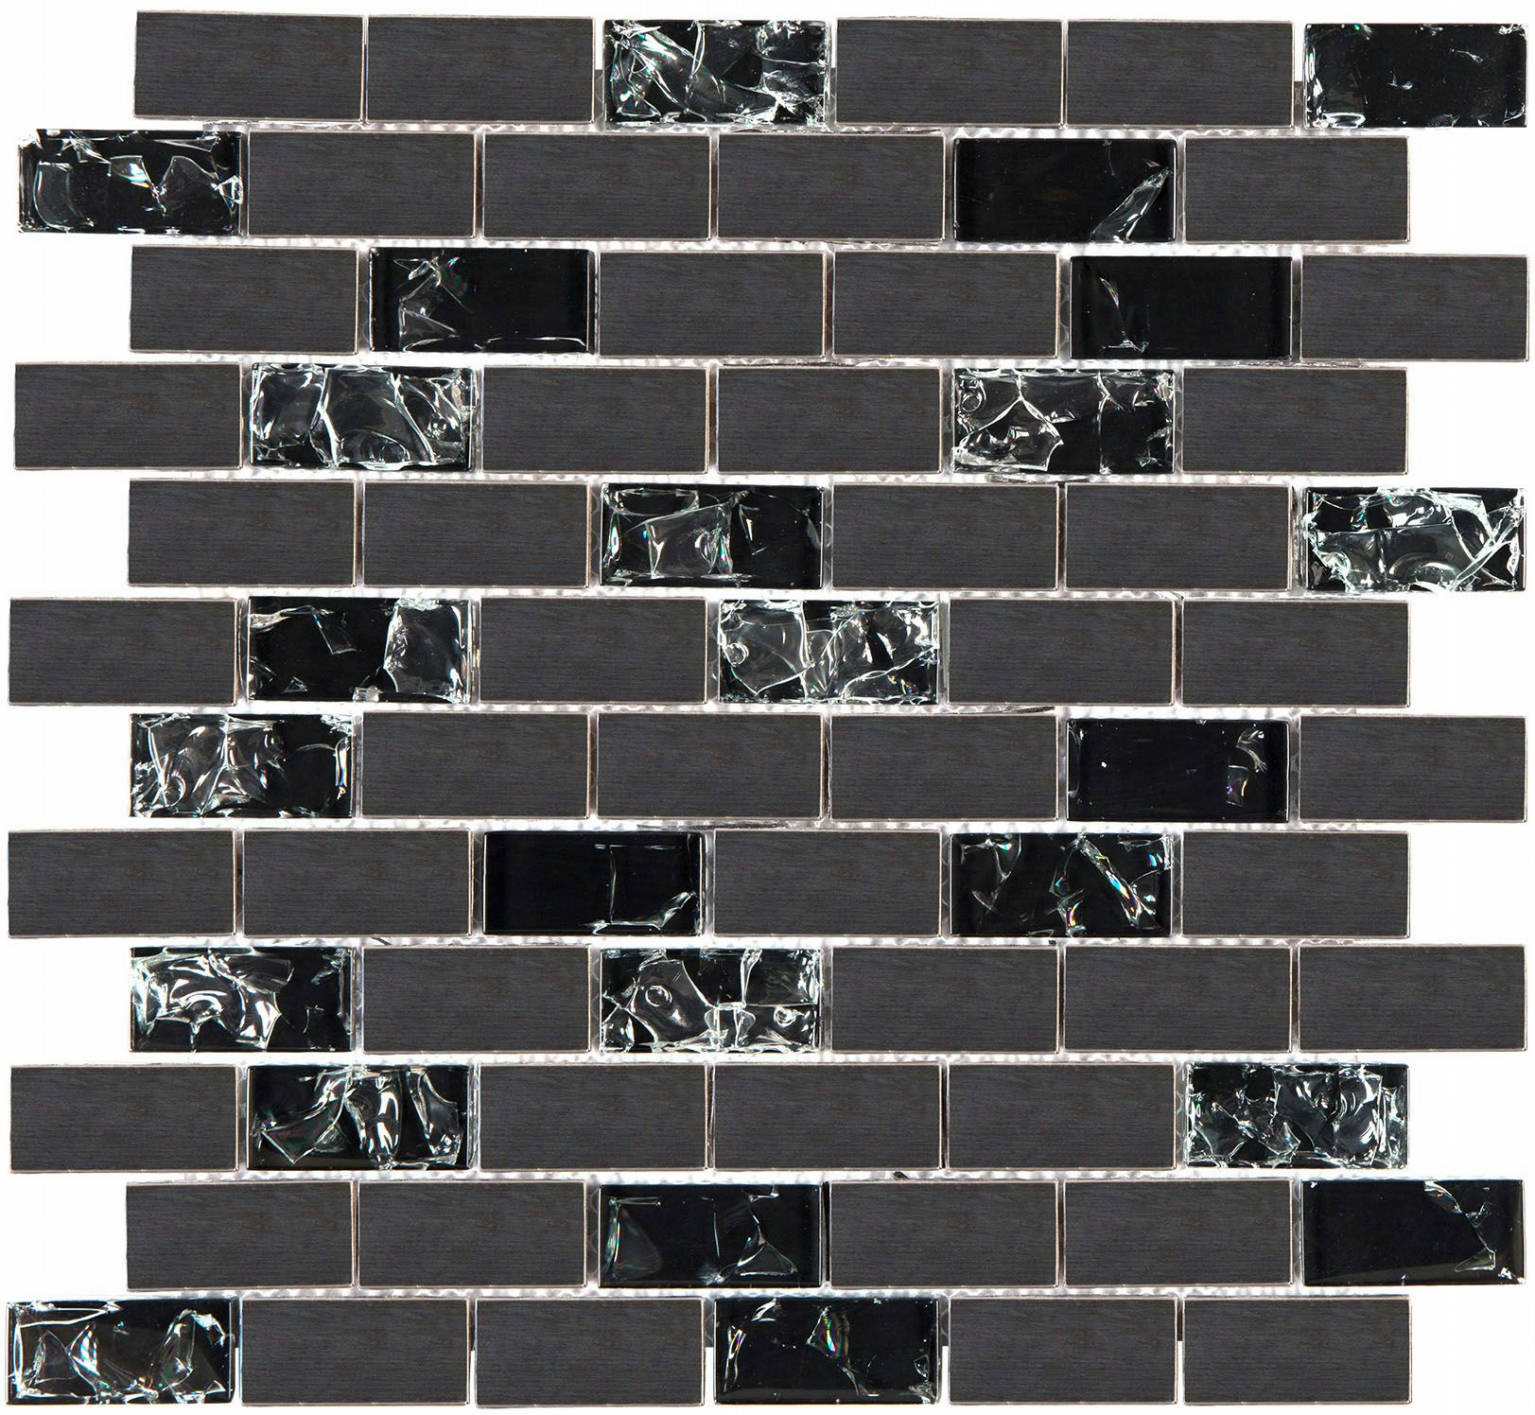 HLX8-23B | Stones & More | Finest selection of Mosaics, Glass, Tile and Stone